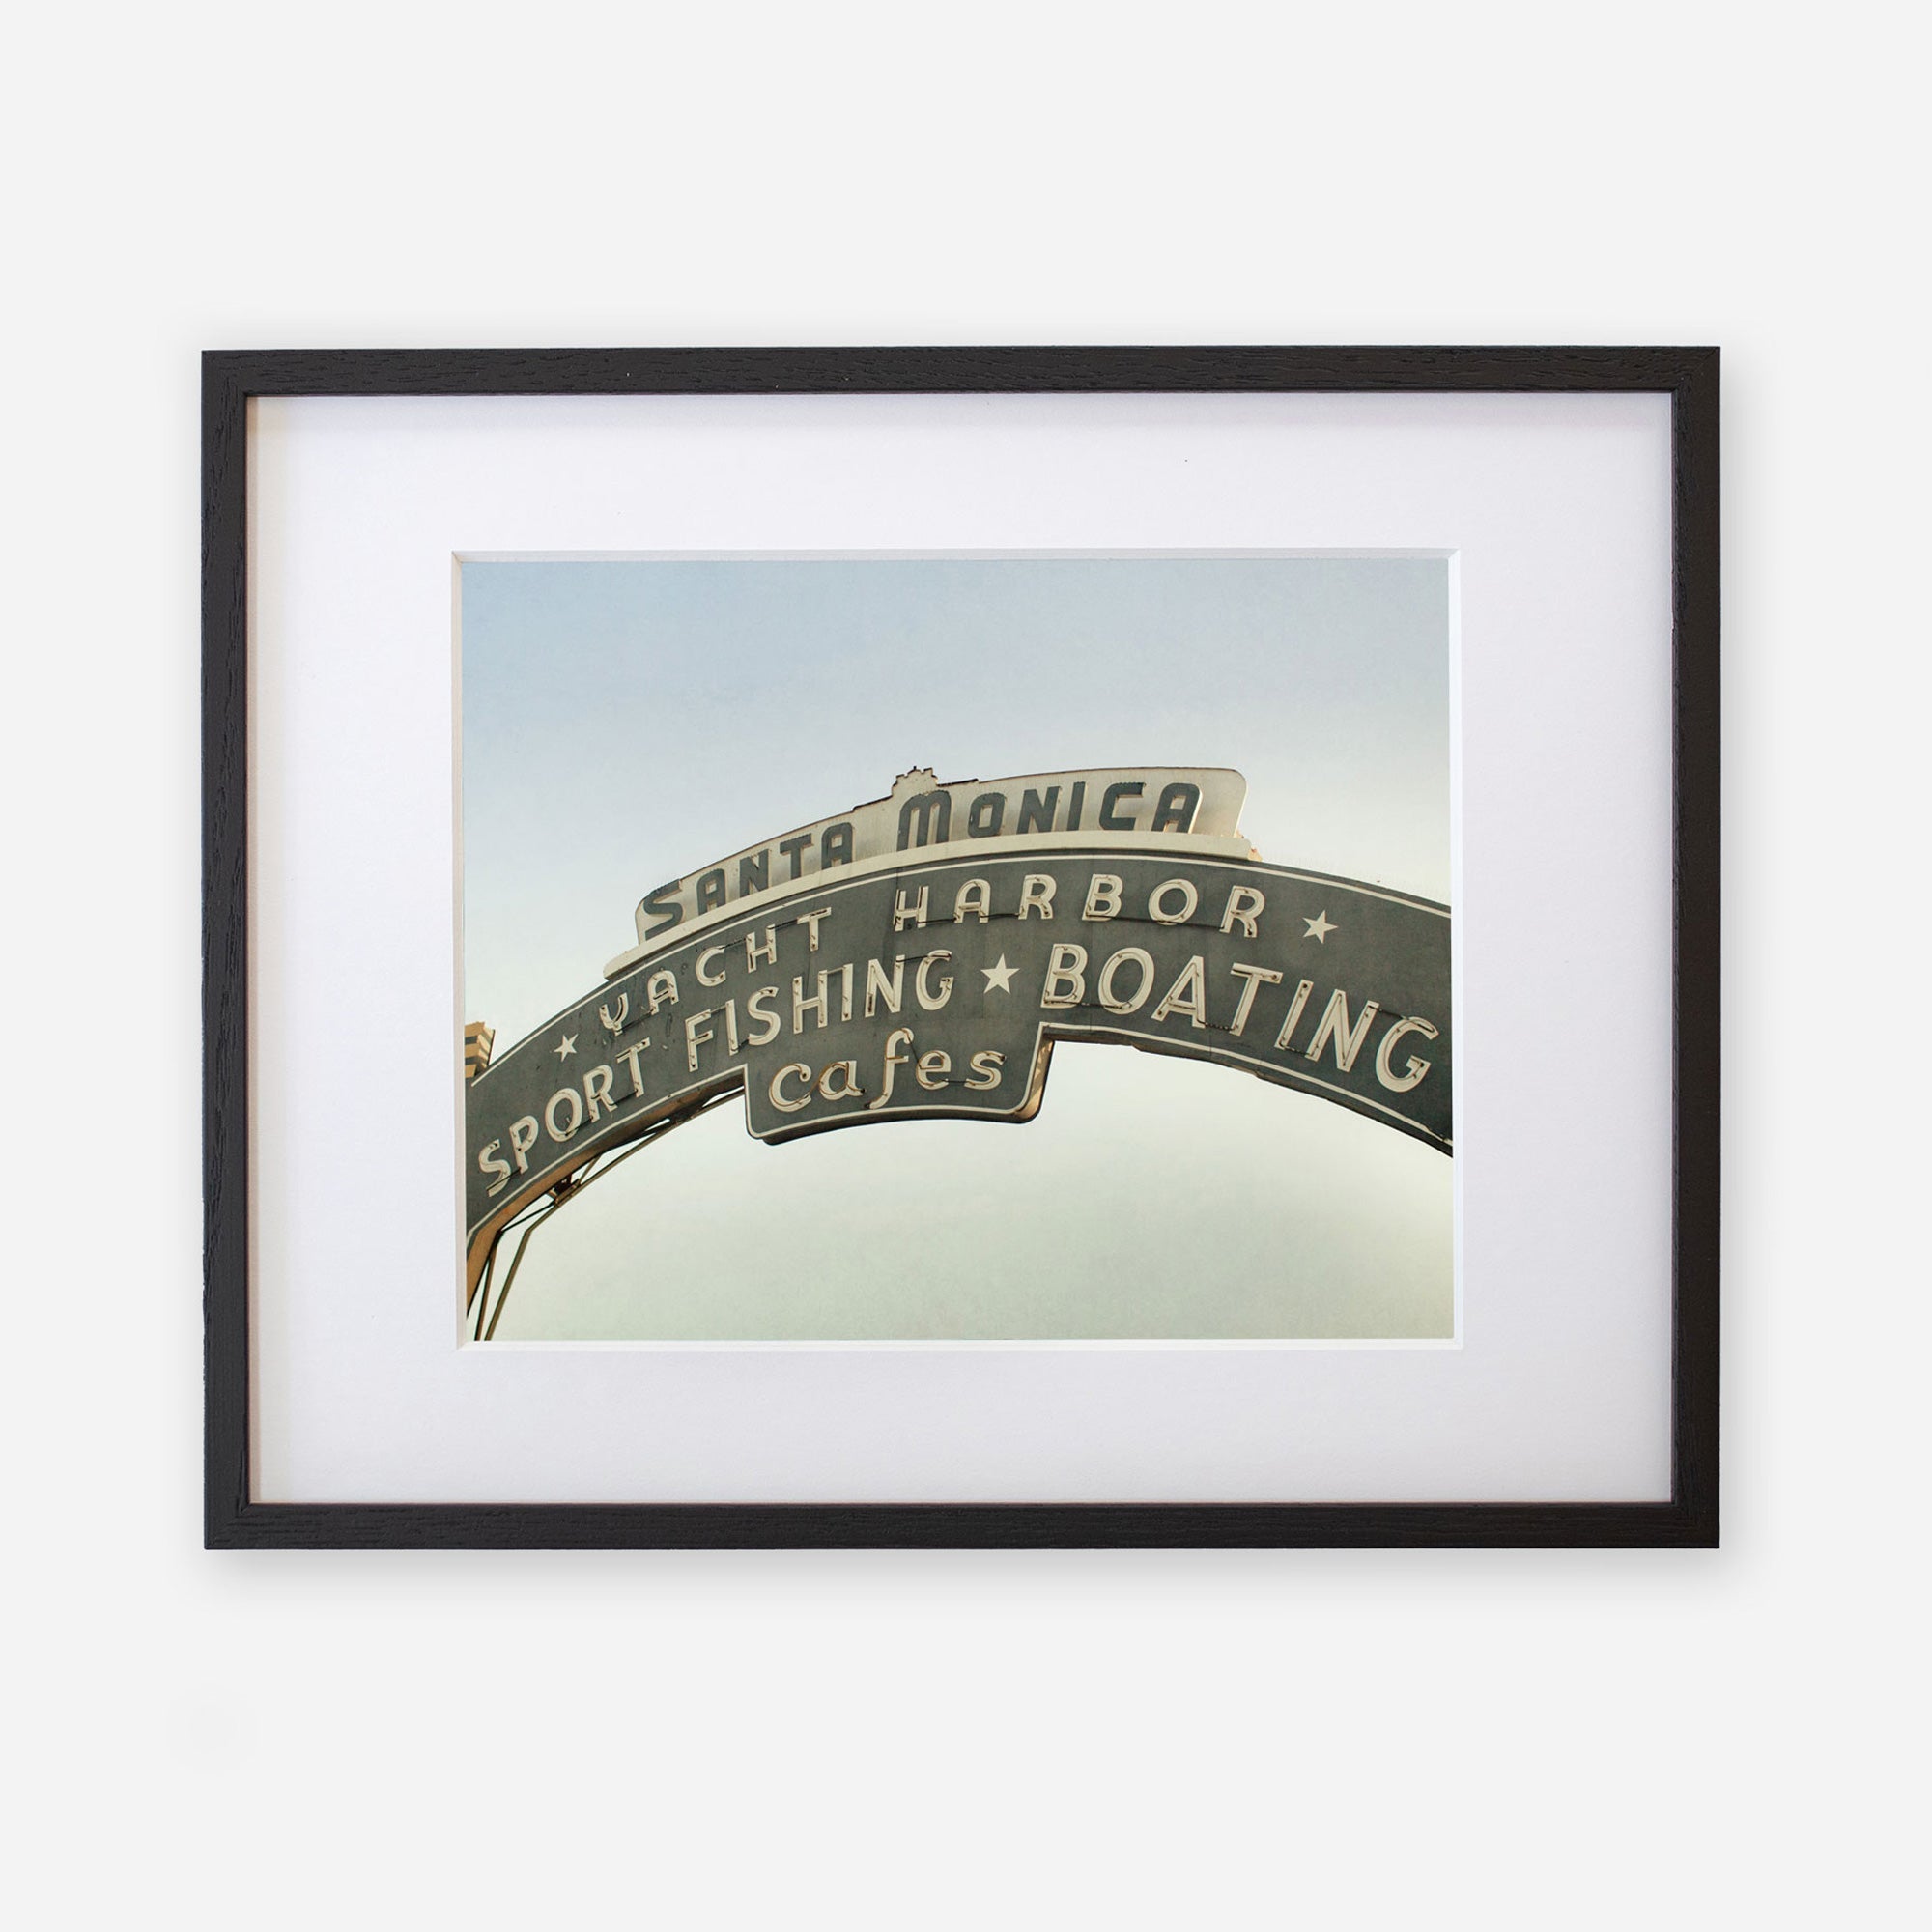 A framed archival Los Angeles California Print, &#39;Santa Monica Pier Blues&#39; by Offley Green, featuring the iconic Santa Monica Pier sign with words like &quot;sport fishing,&quot; &quot;boating,&quot; and &quot;cafes&quot; against a clear sky background.